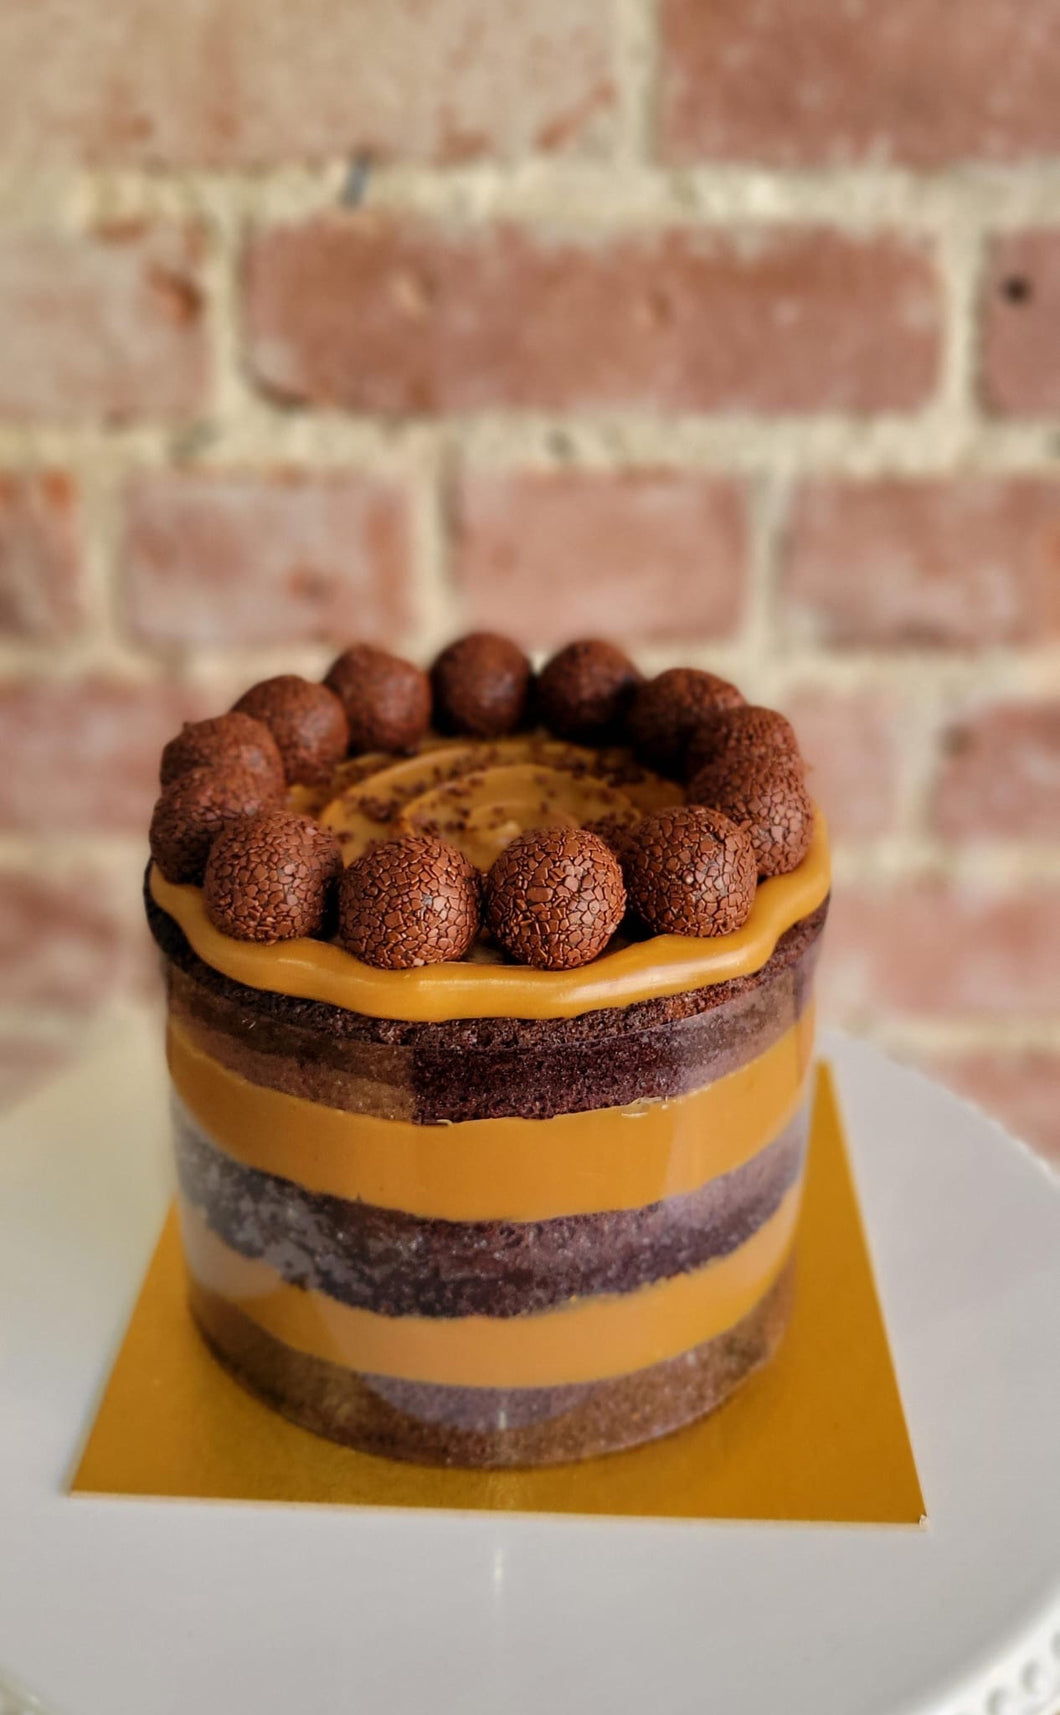 Cake of the Month- 6” Chocolate with Doce de Leite!